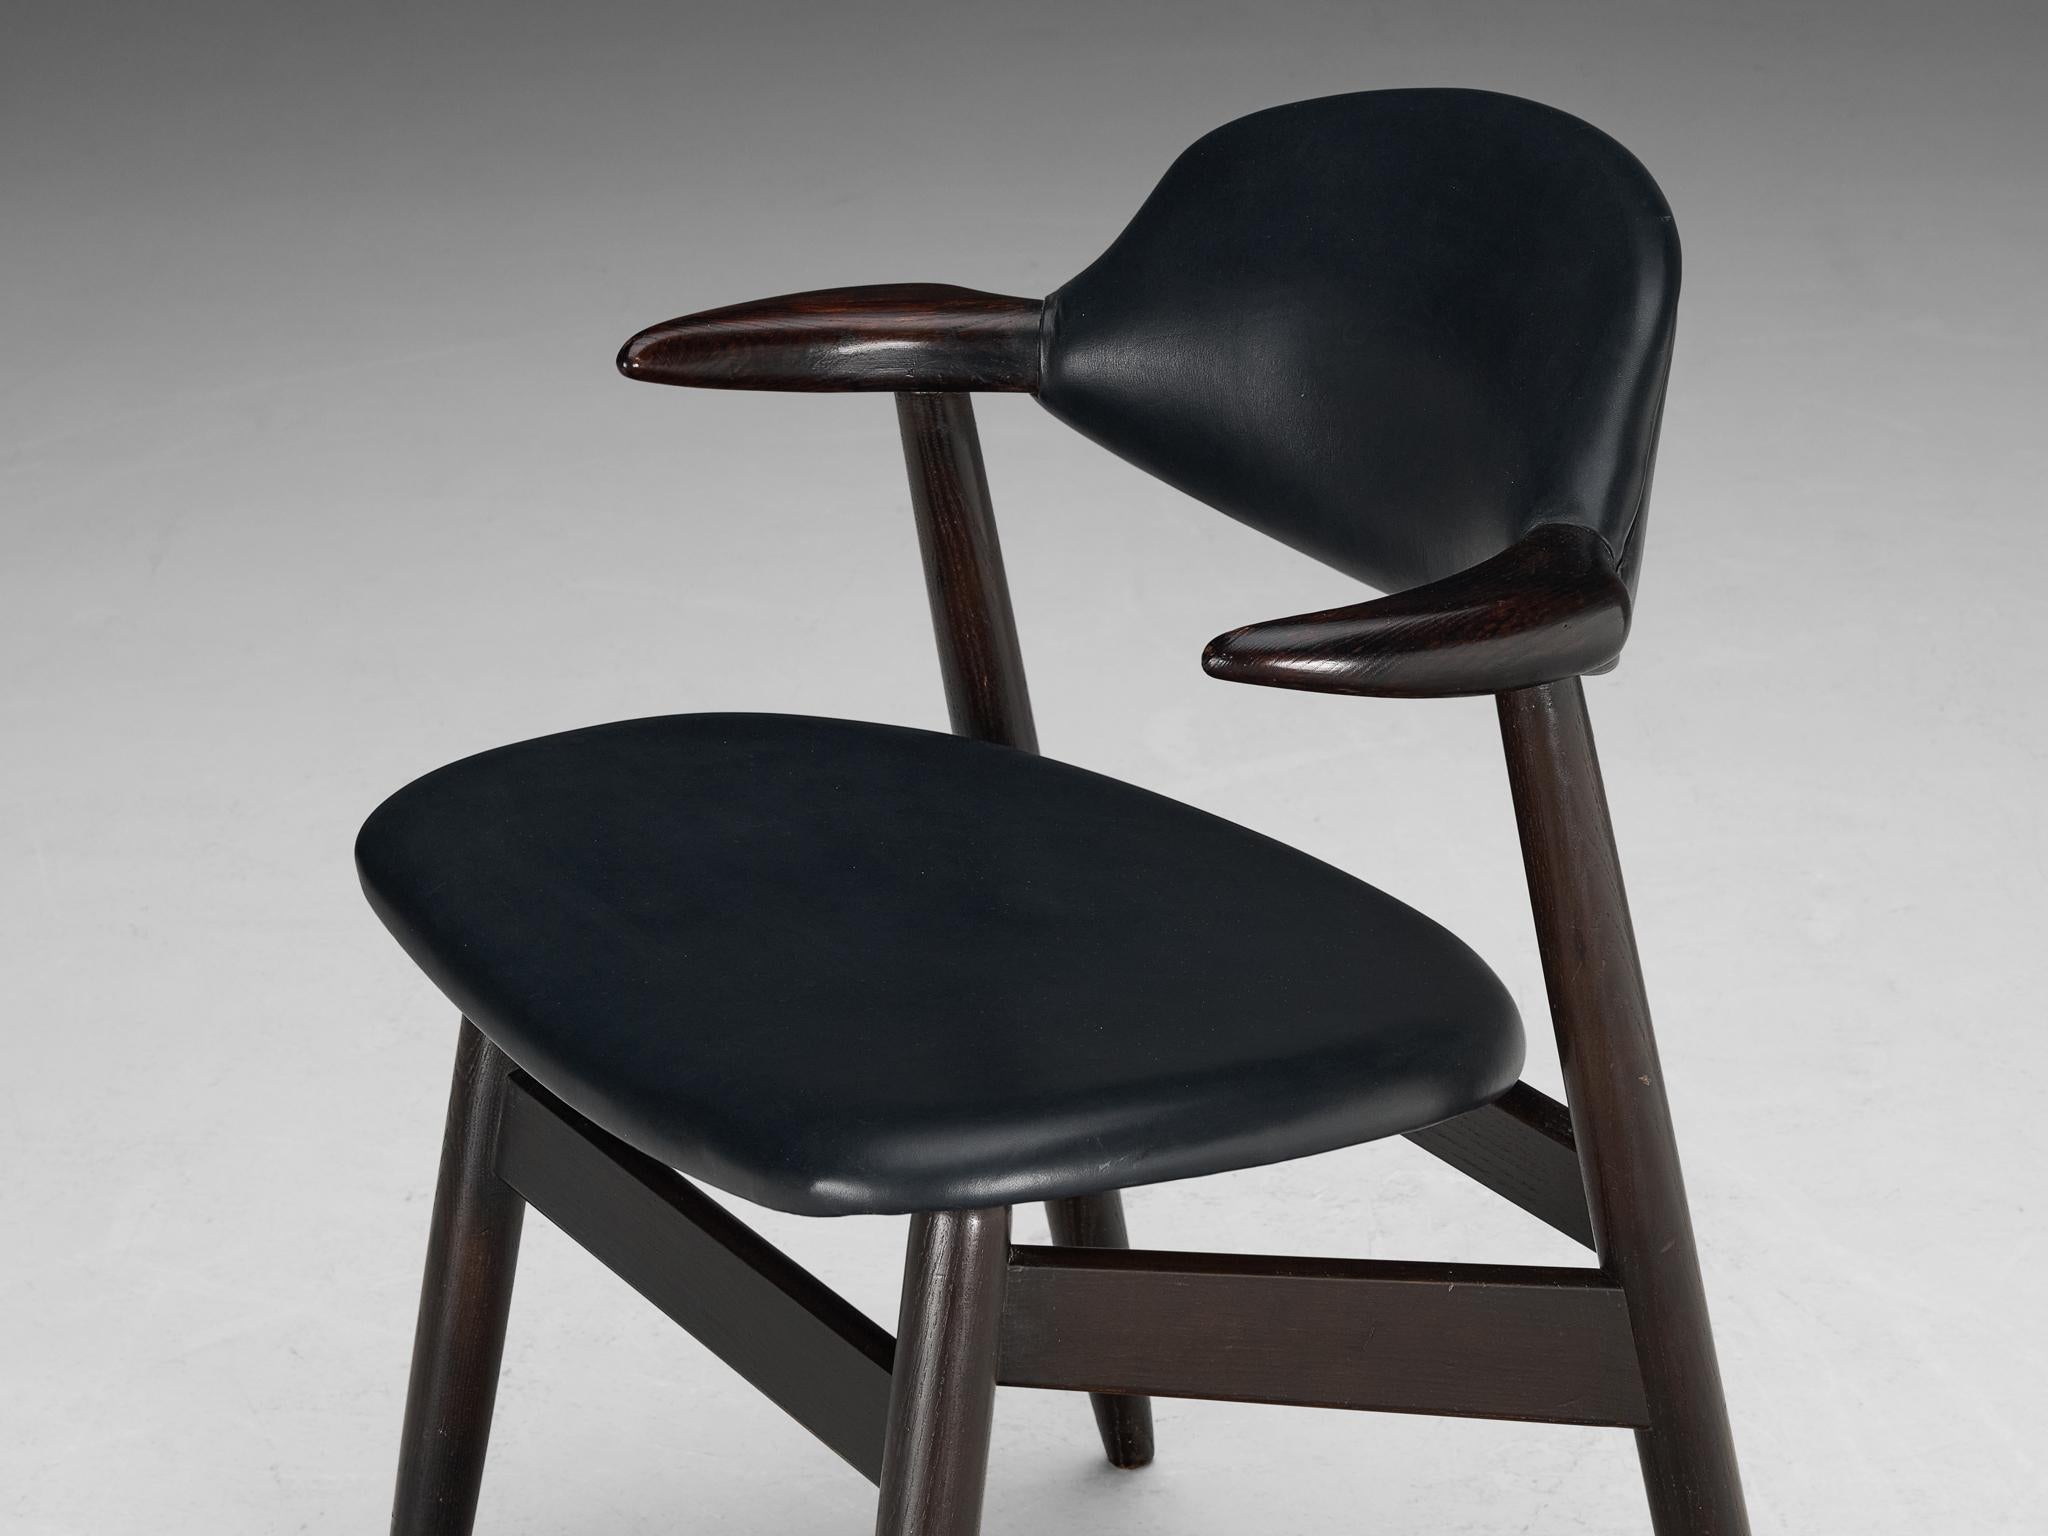 ‘Bullhorn’ Armchair in Ash and Black Upholstery